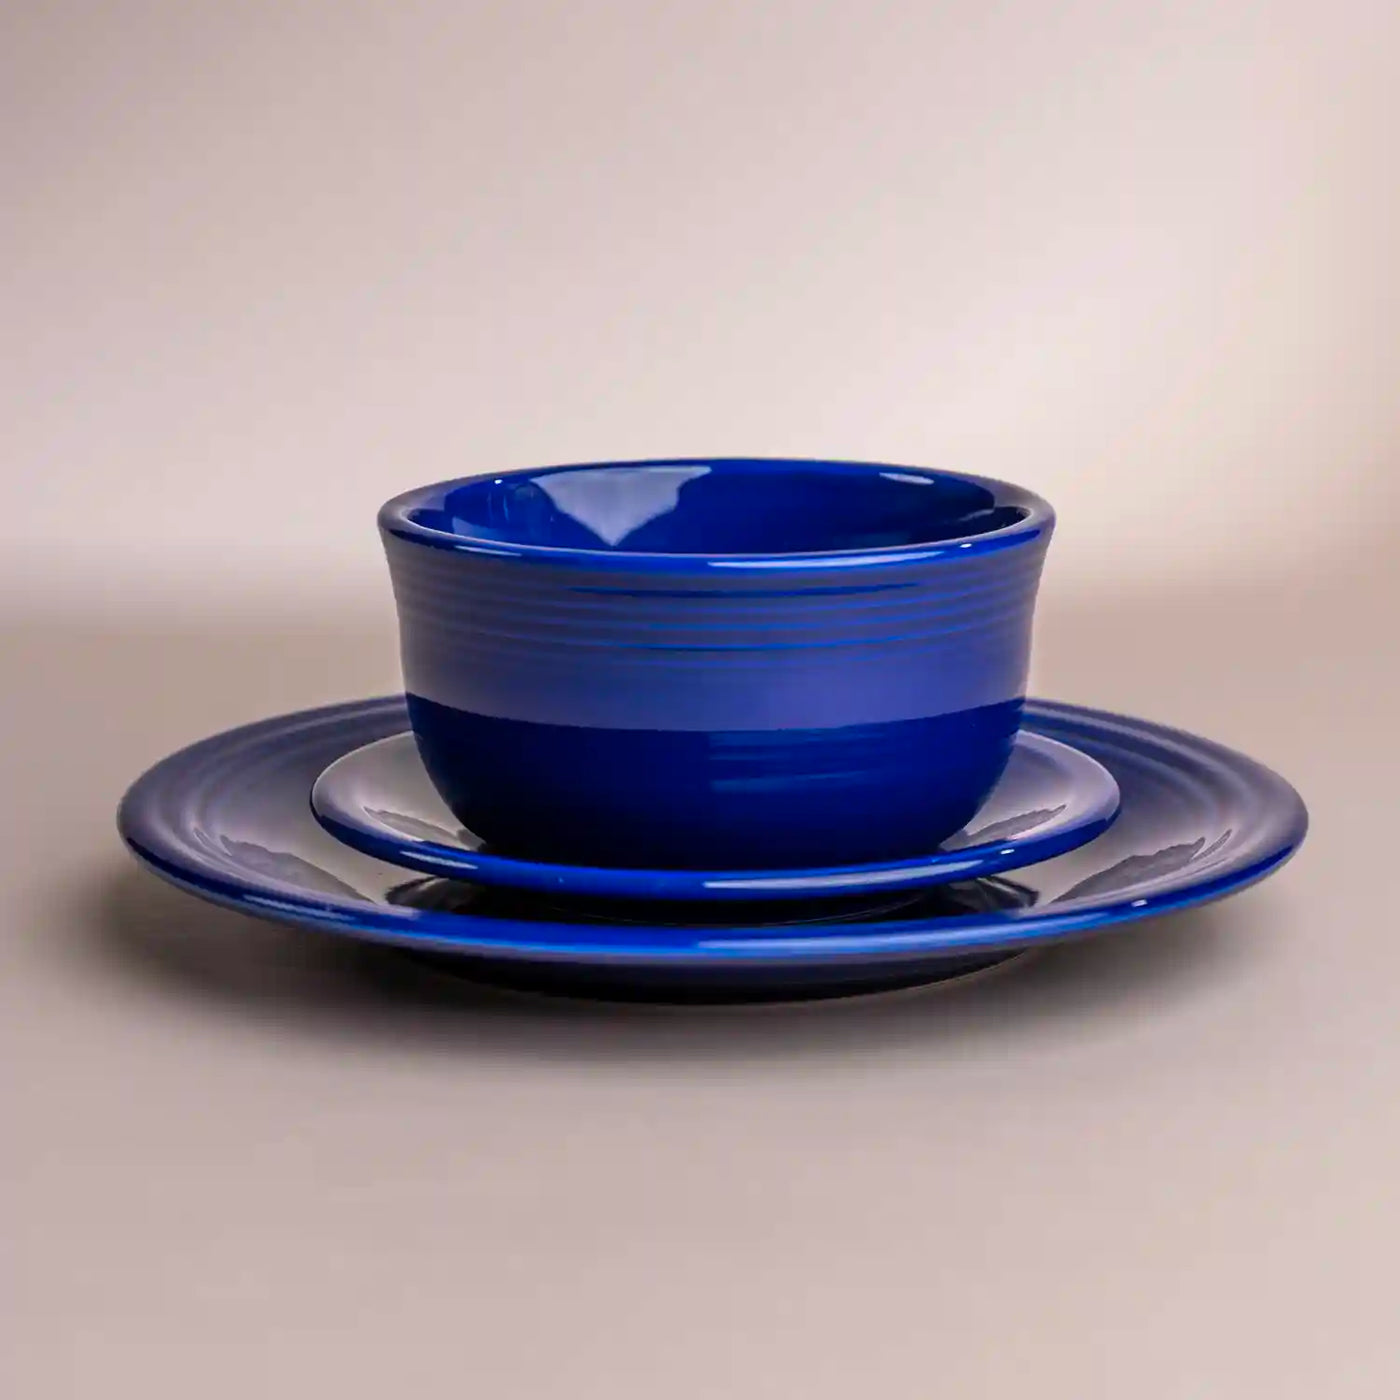 Fiesta twilight blue dinner plate salad plate and gusto bowl. Stacked. 